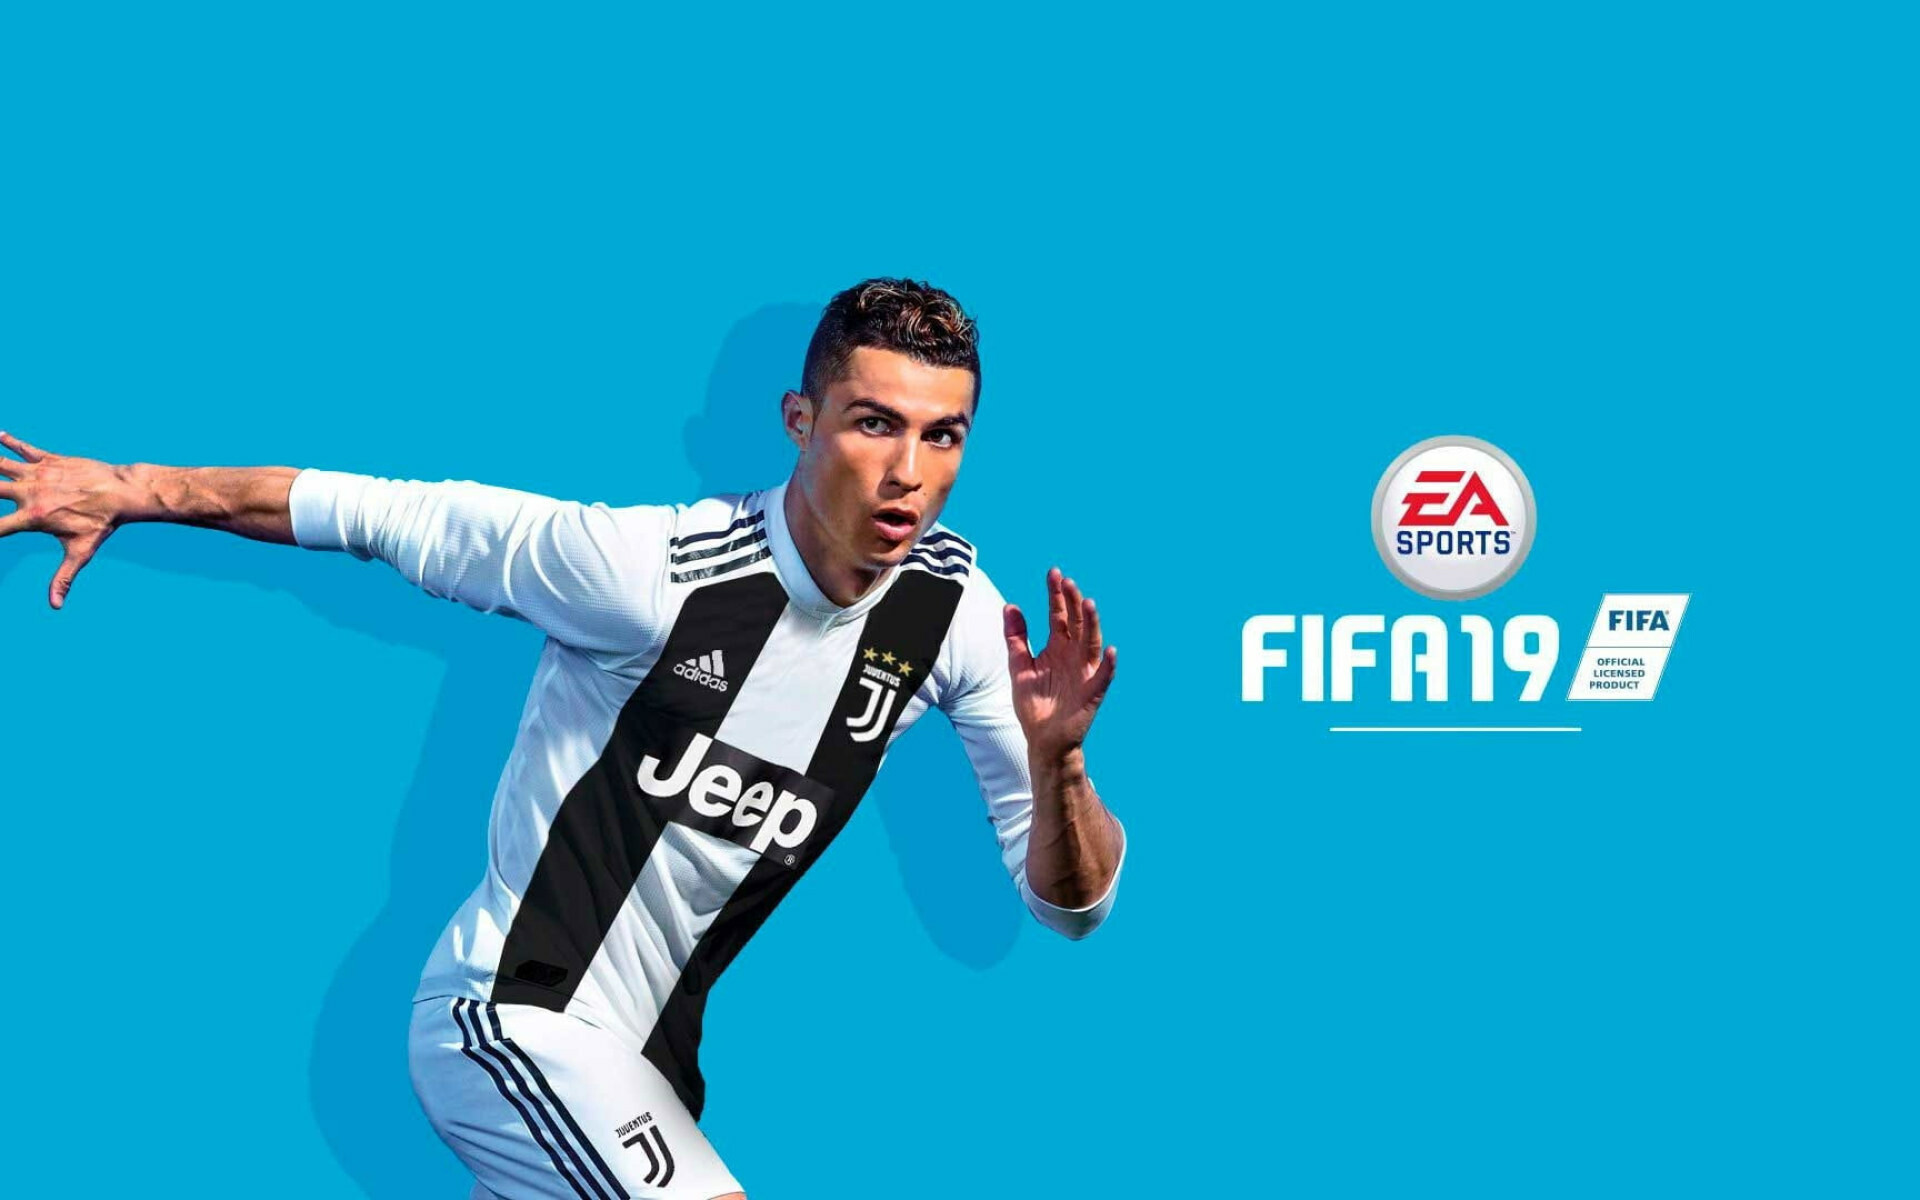 FIFA: The last FIFA game to be available on the Xbox 360 and PlayStation 3, Ronaldo. 1920x1200 HD Wallpaper.